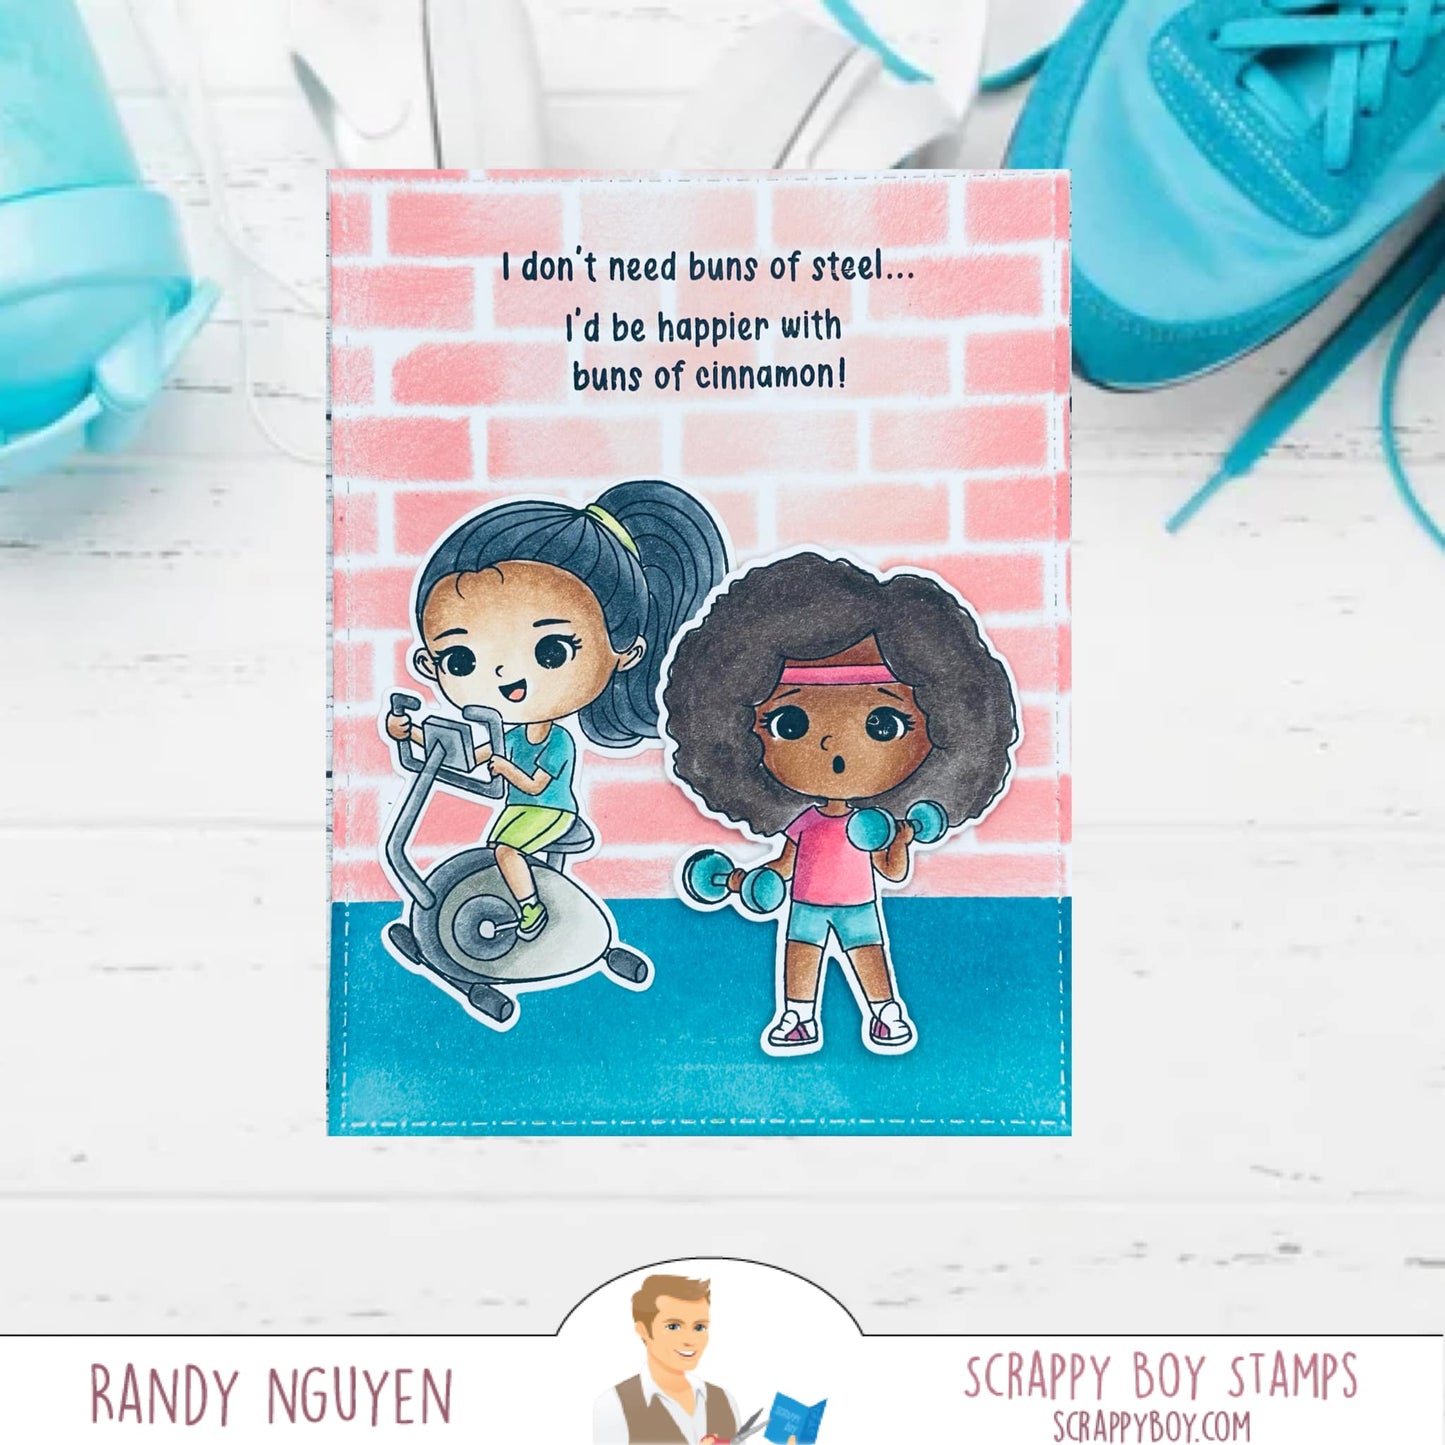 
                  
                    I Want It All Bundle - Cute Girls Let's Workout Release
                  
                